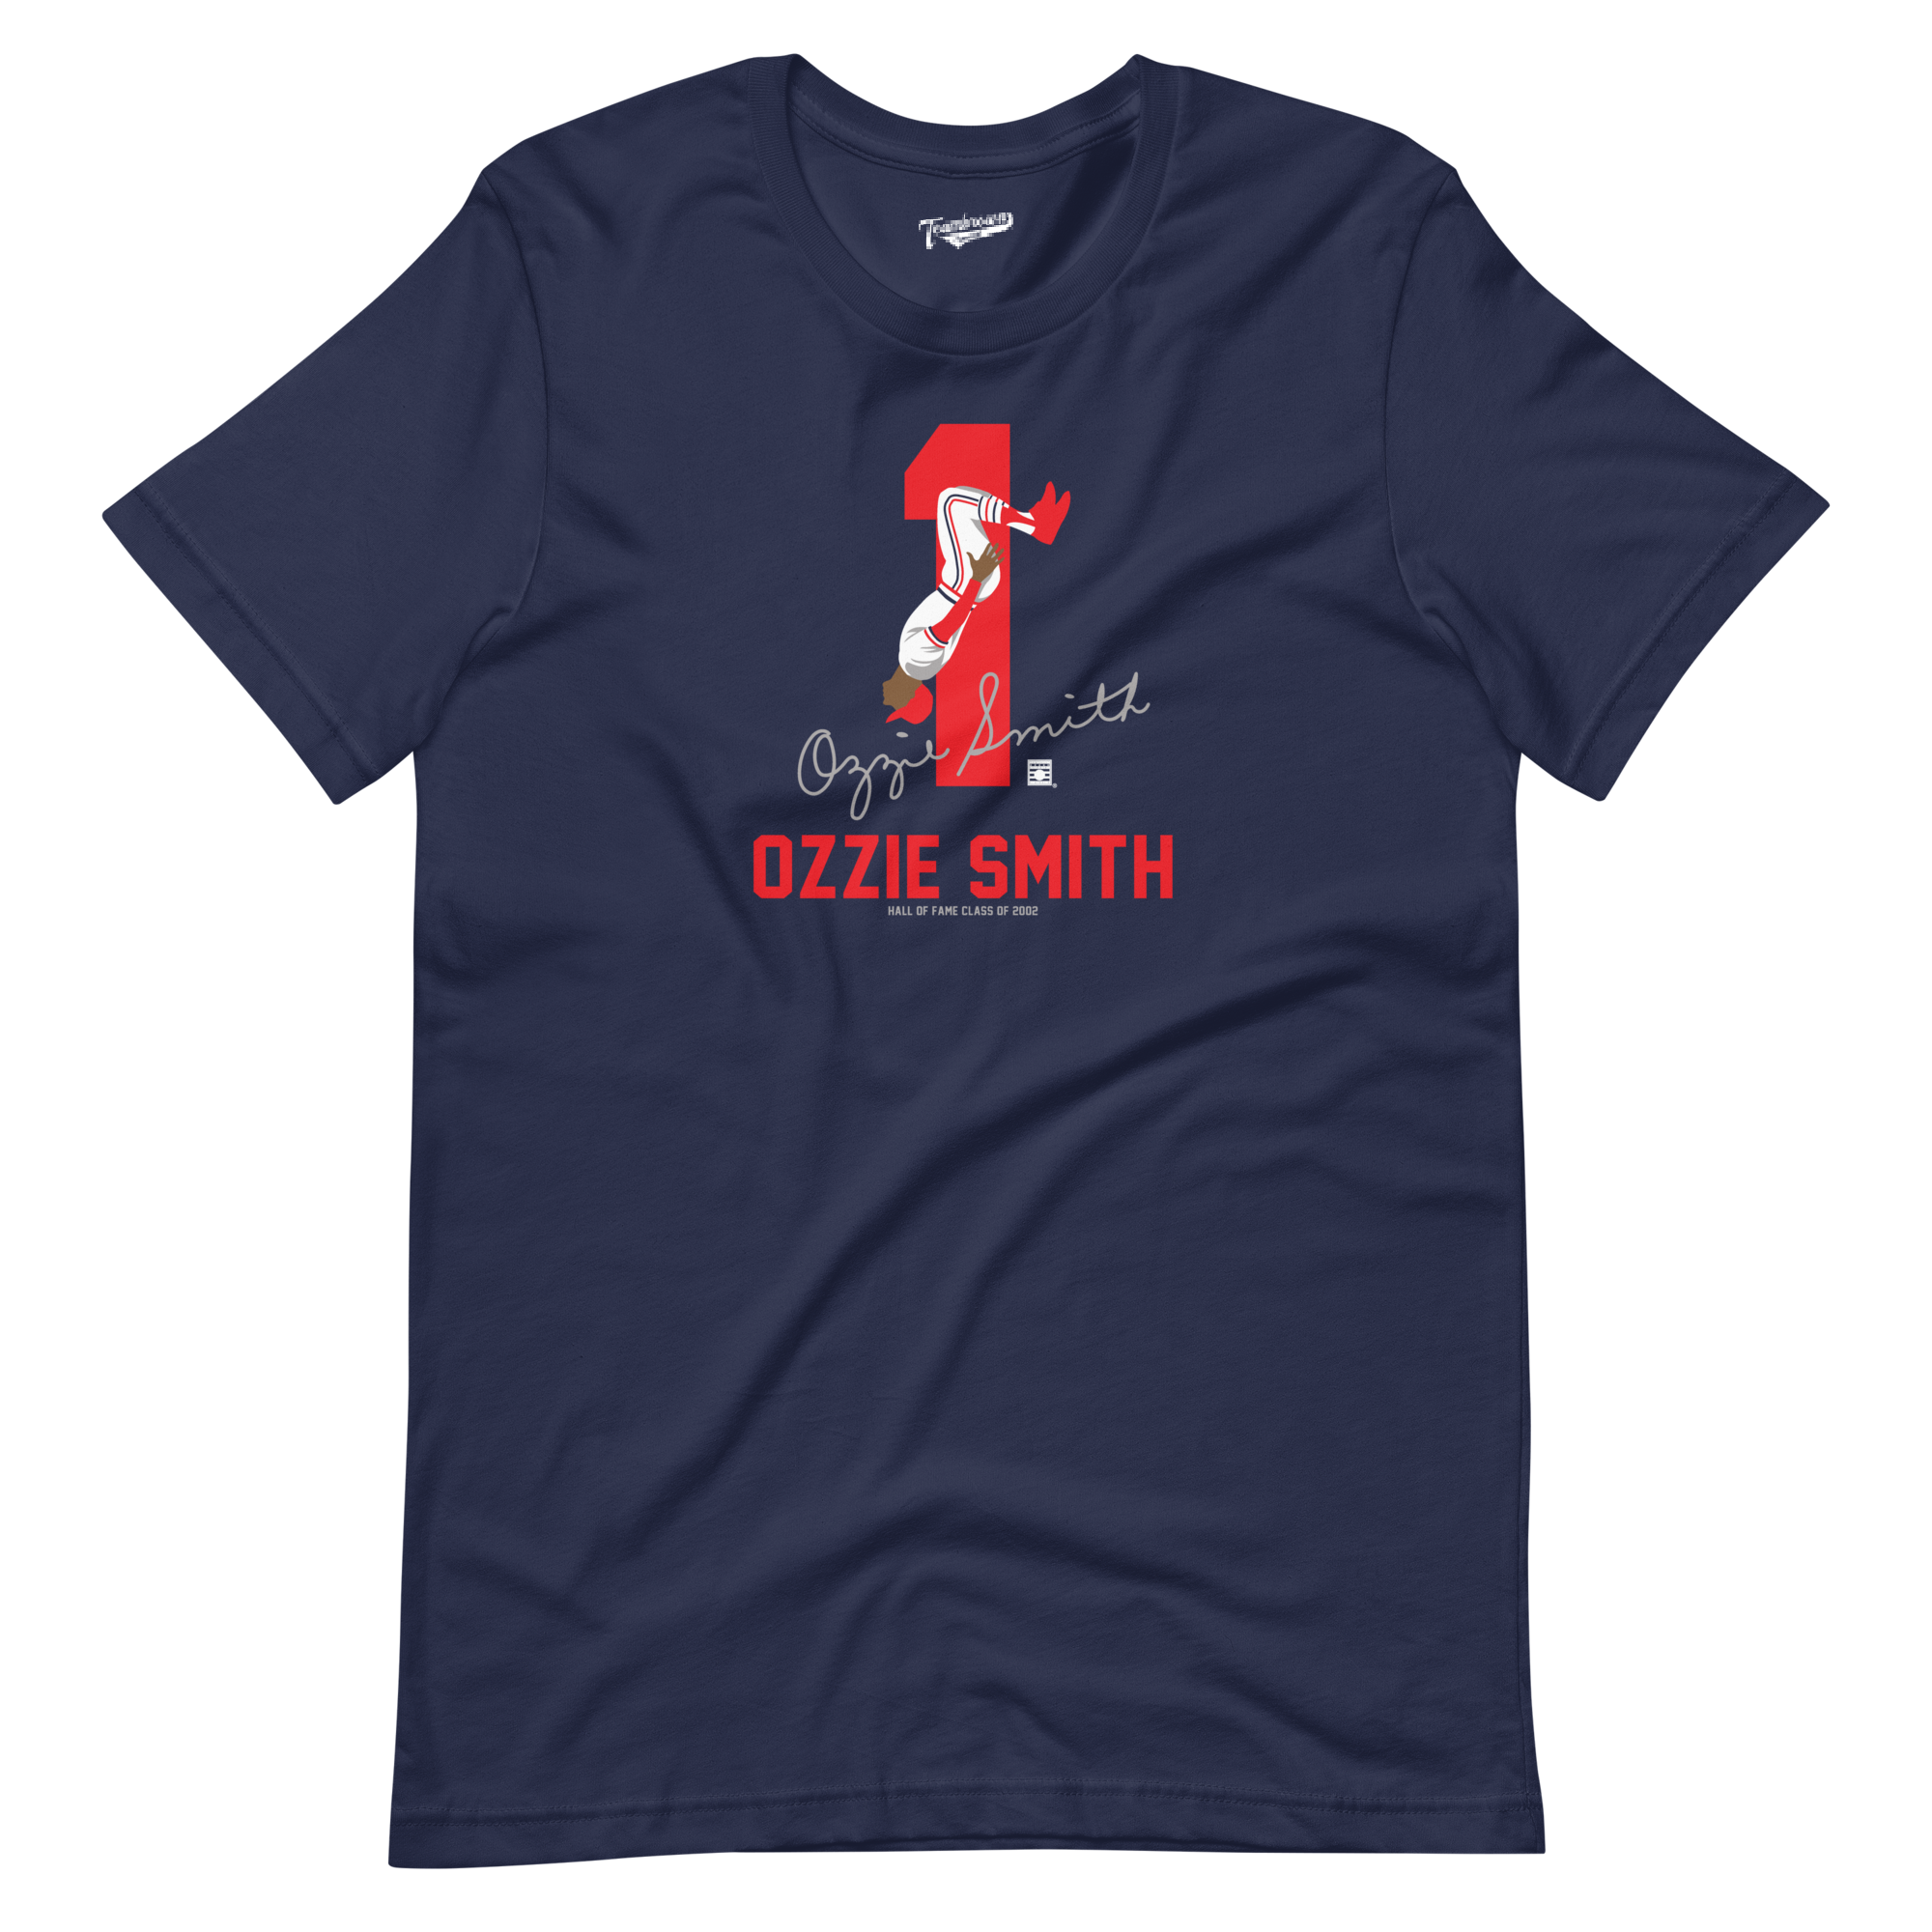 Not in Hall of Fame - 5. Ozzie Smith